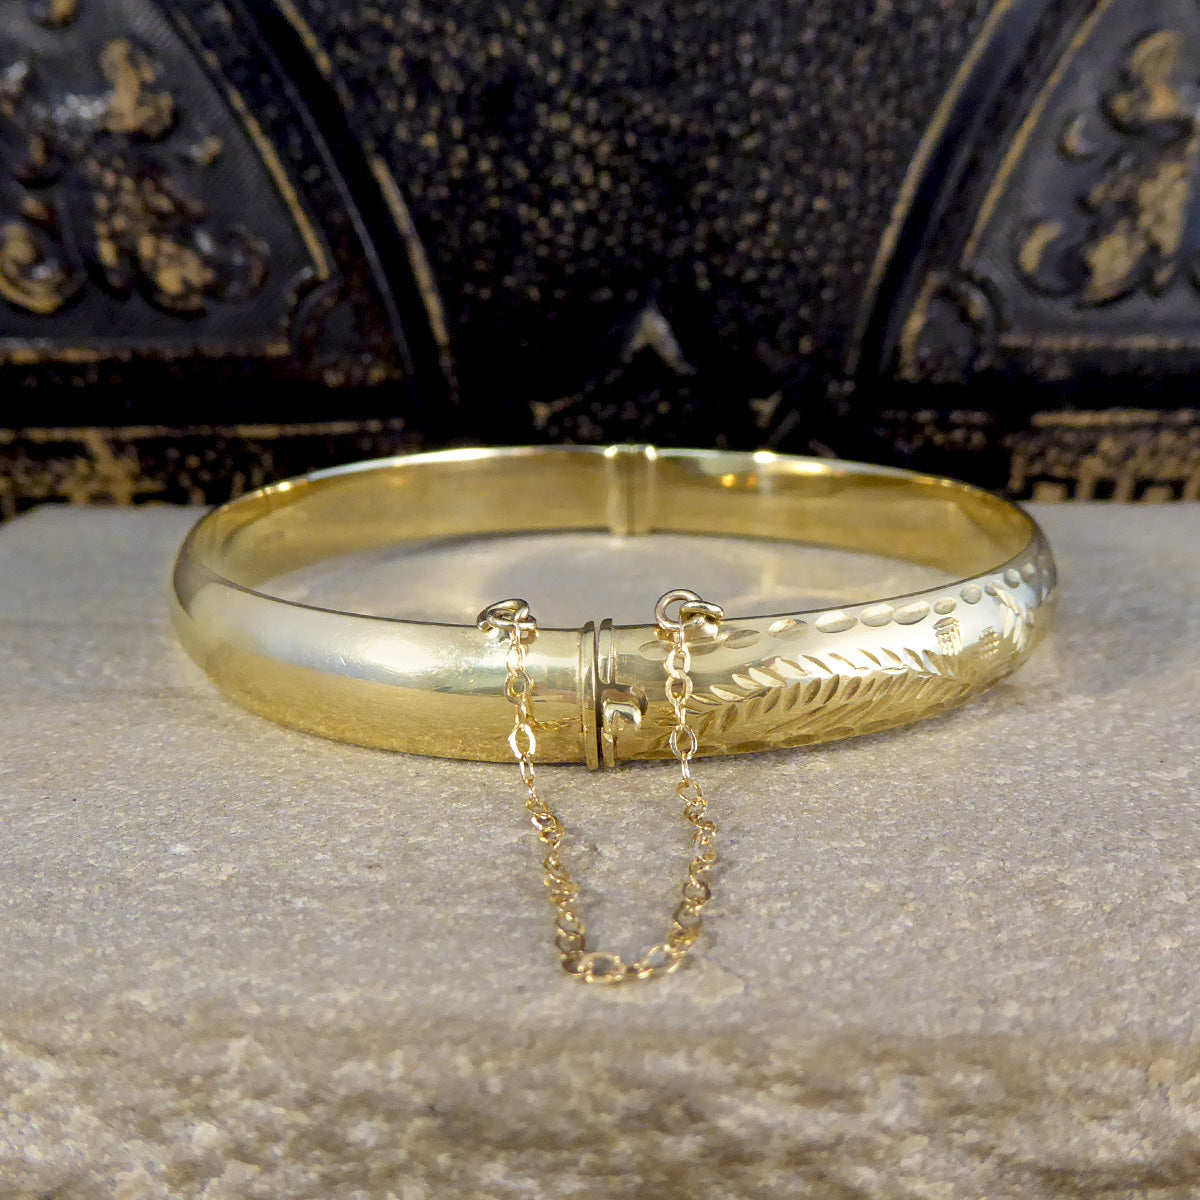 Vintage Yellow Gold Engraved Bangle with Safety Chain